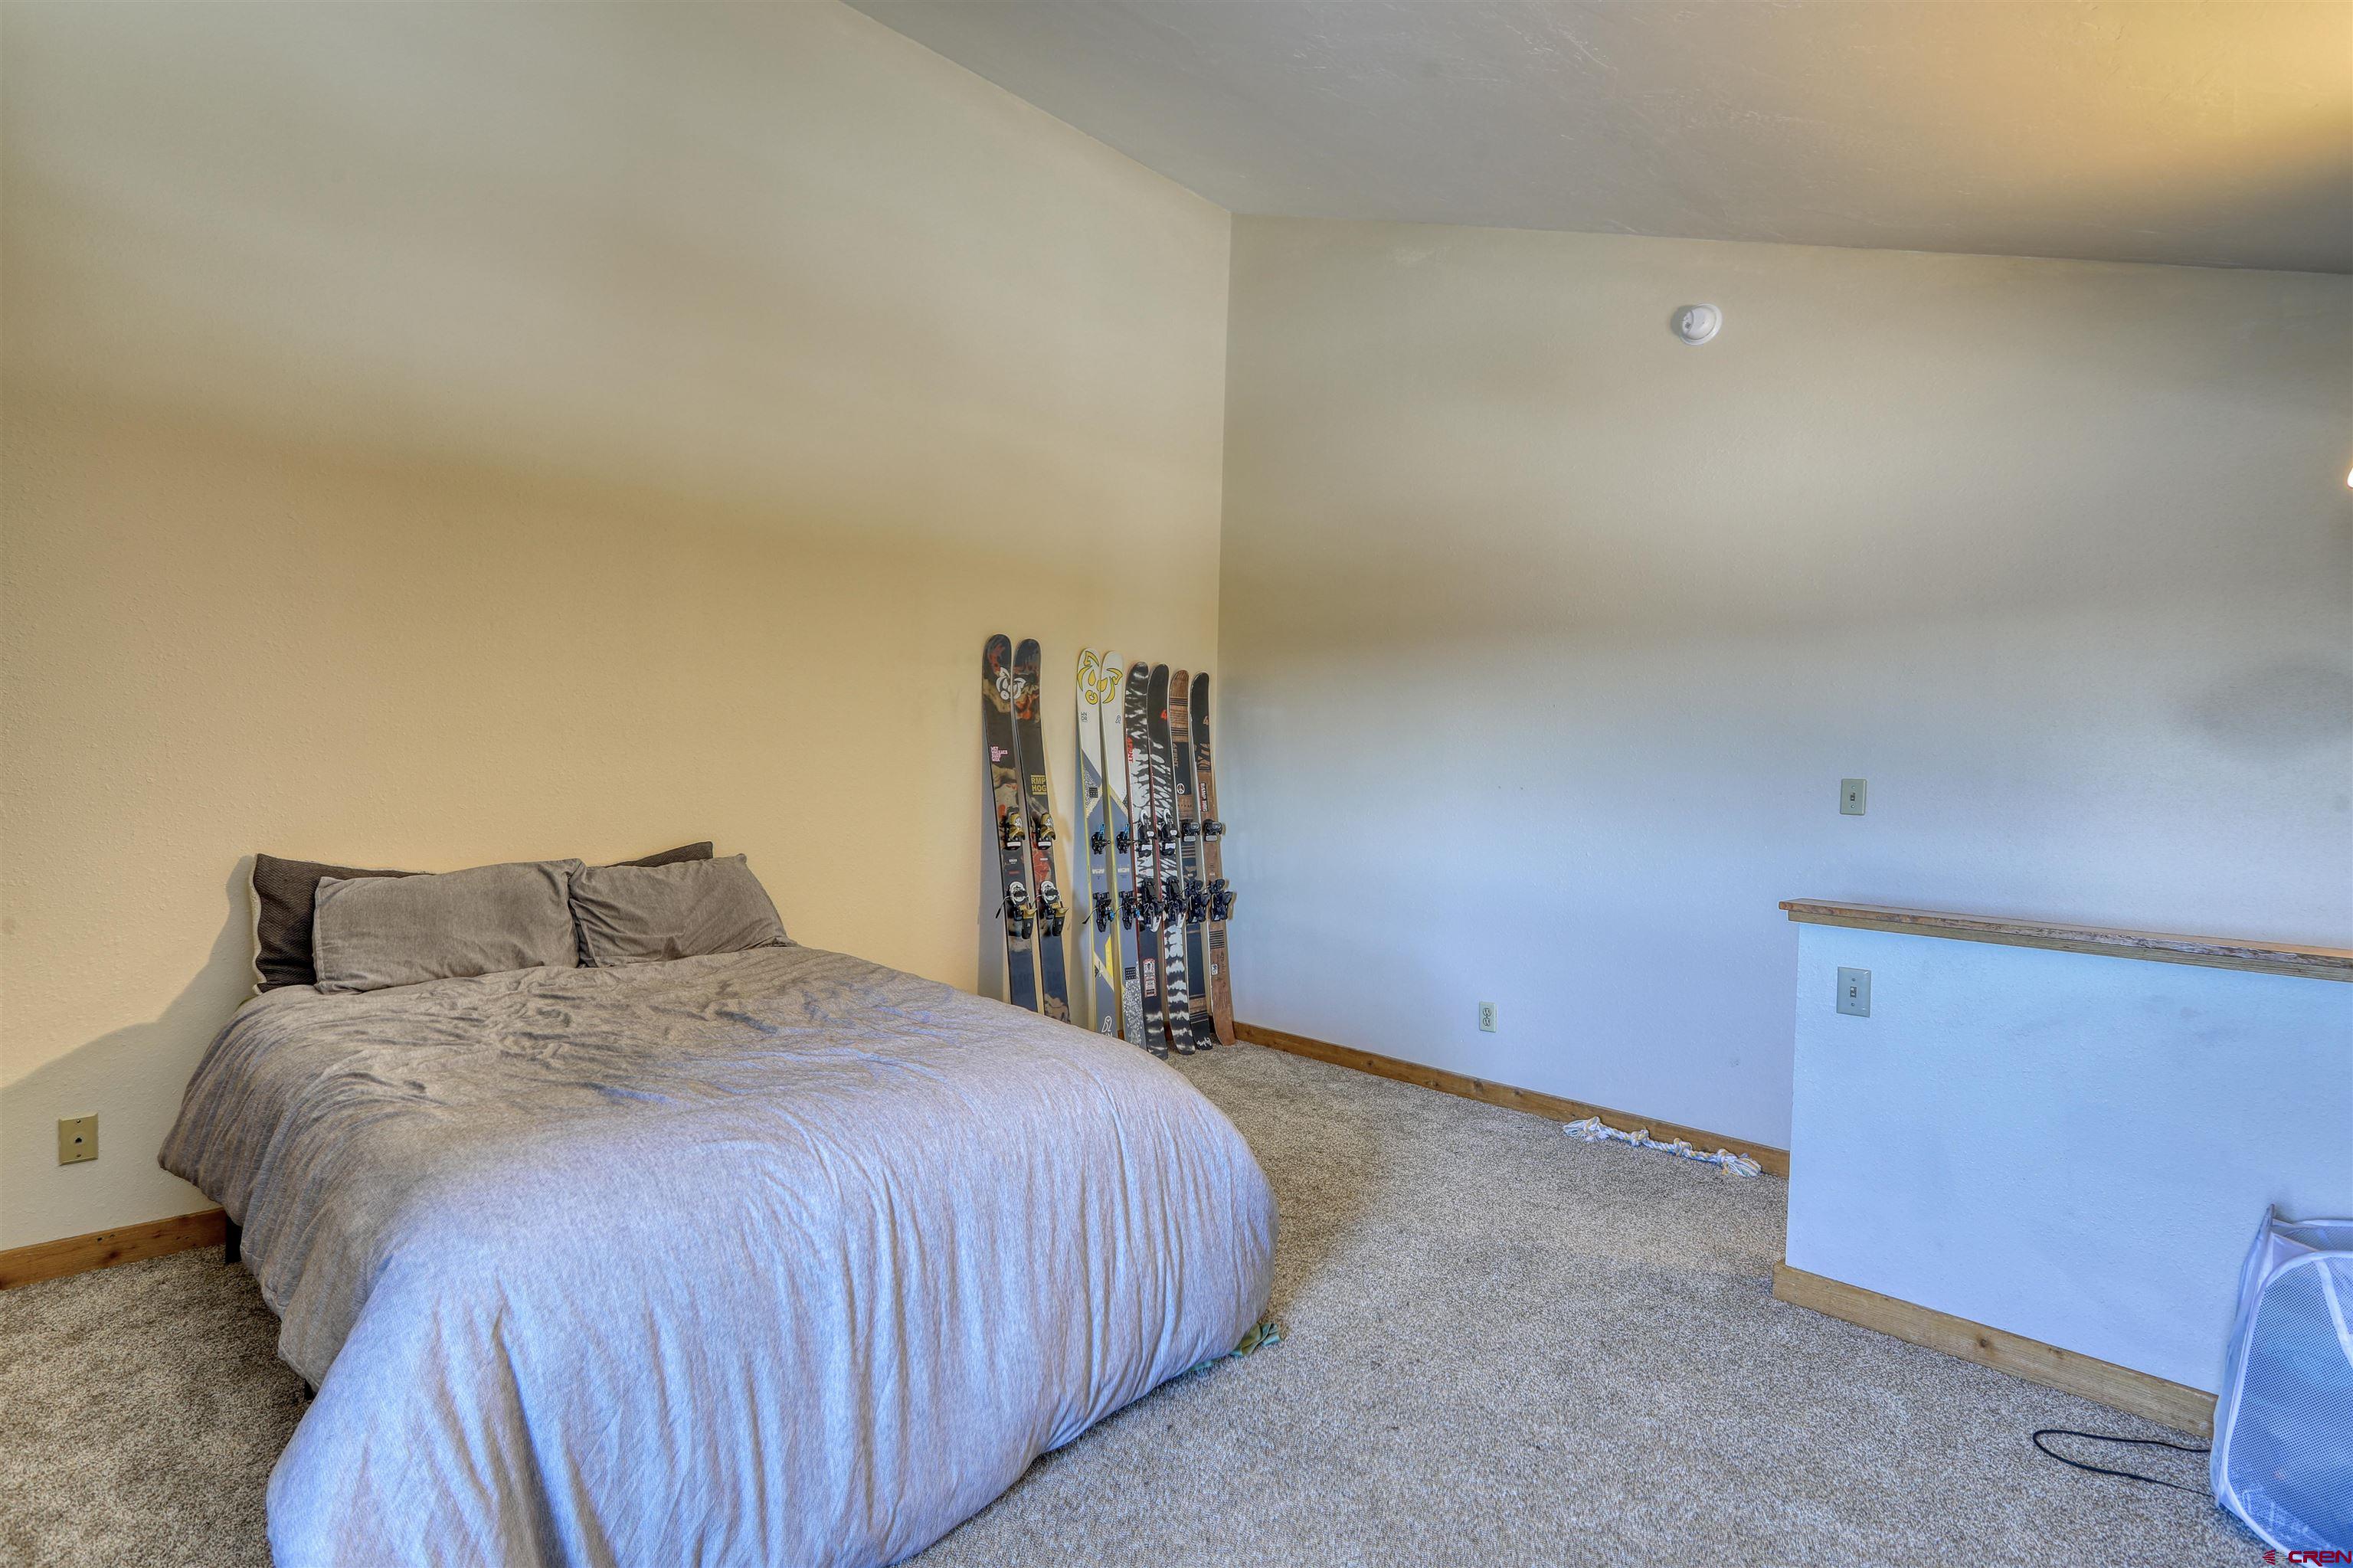 89 Valley View Drive, #3197, Pagosa Springs, CO 81147 Listing Photo  19